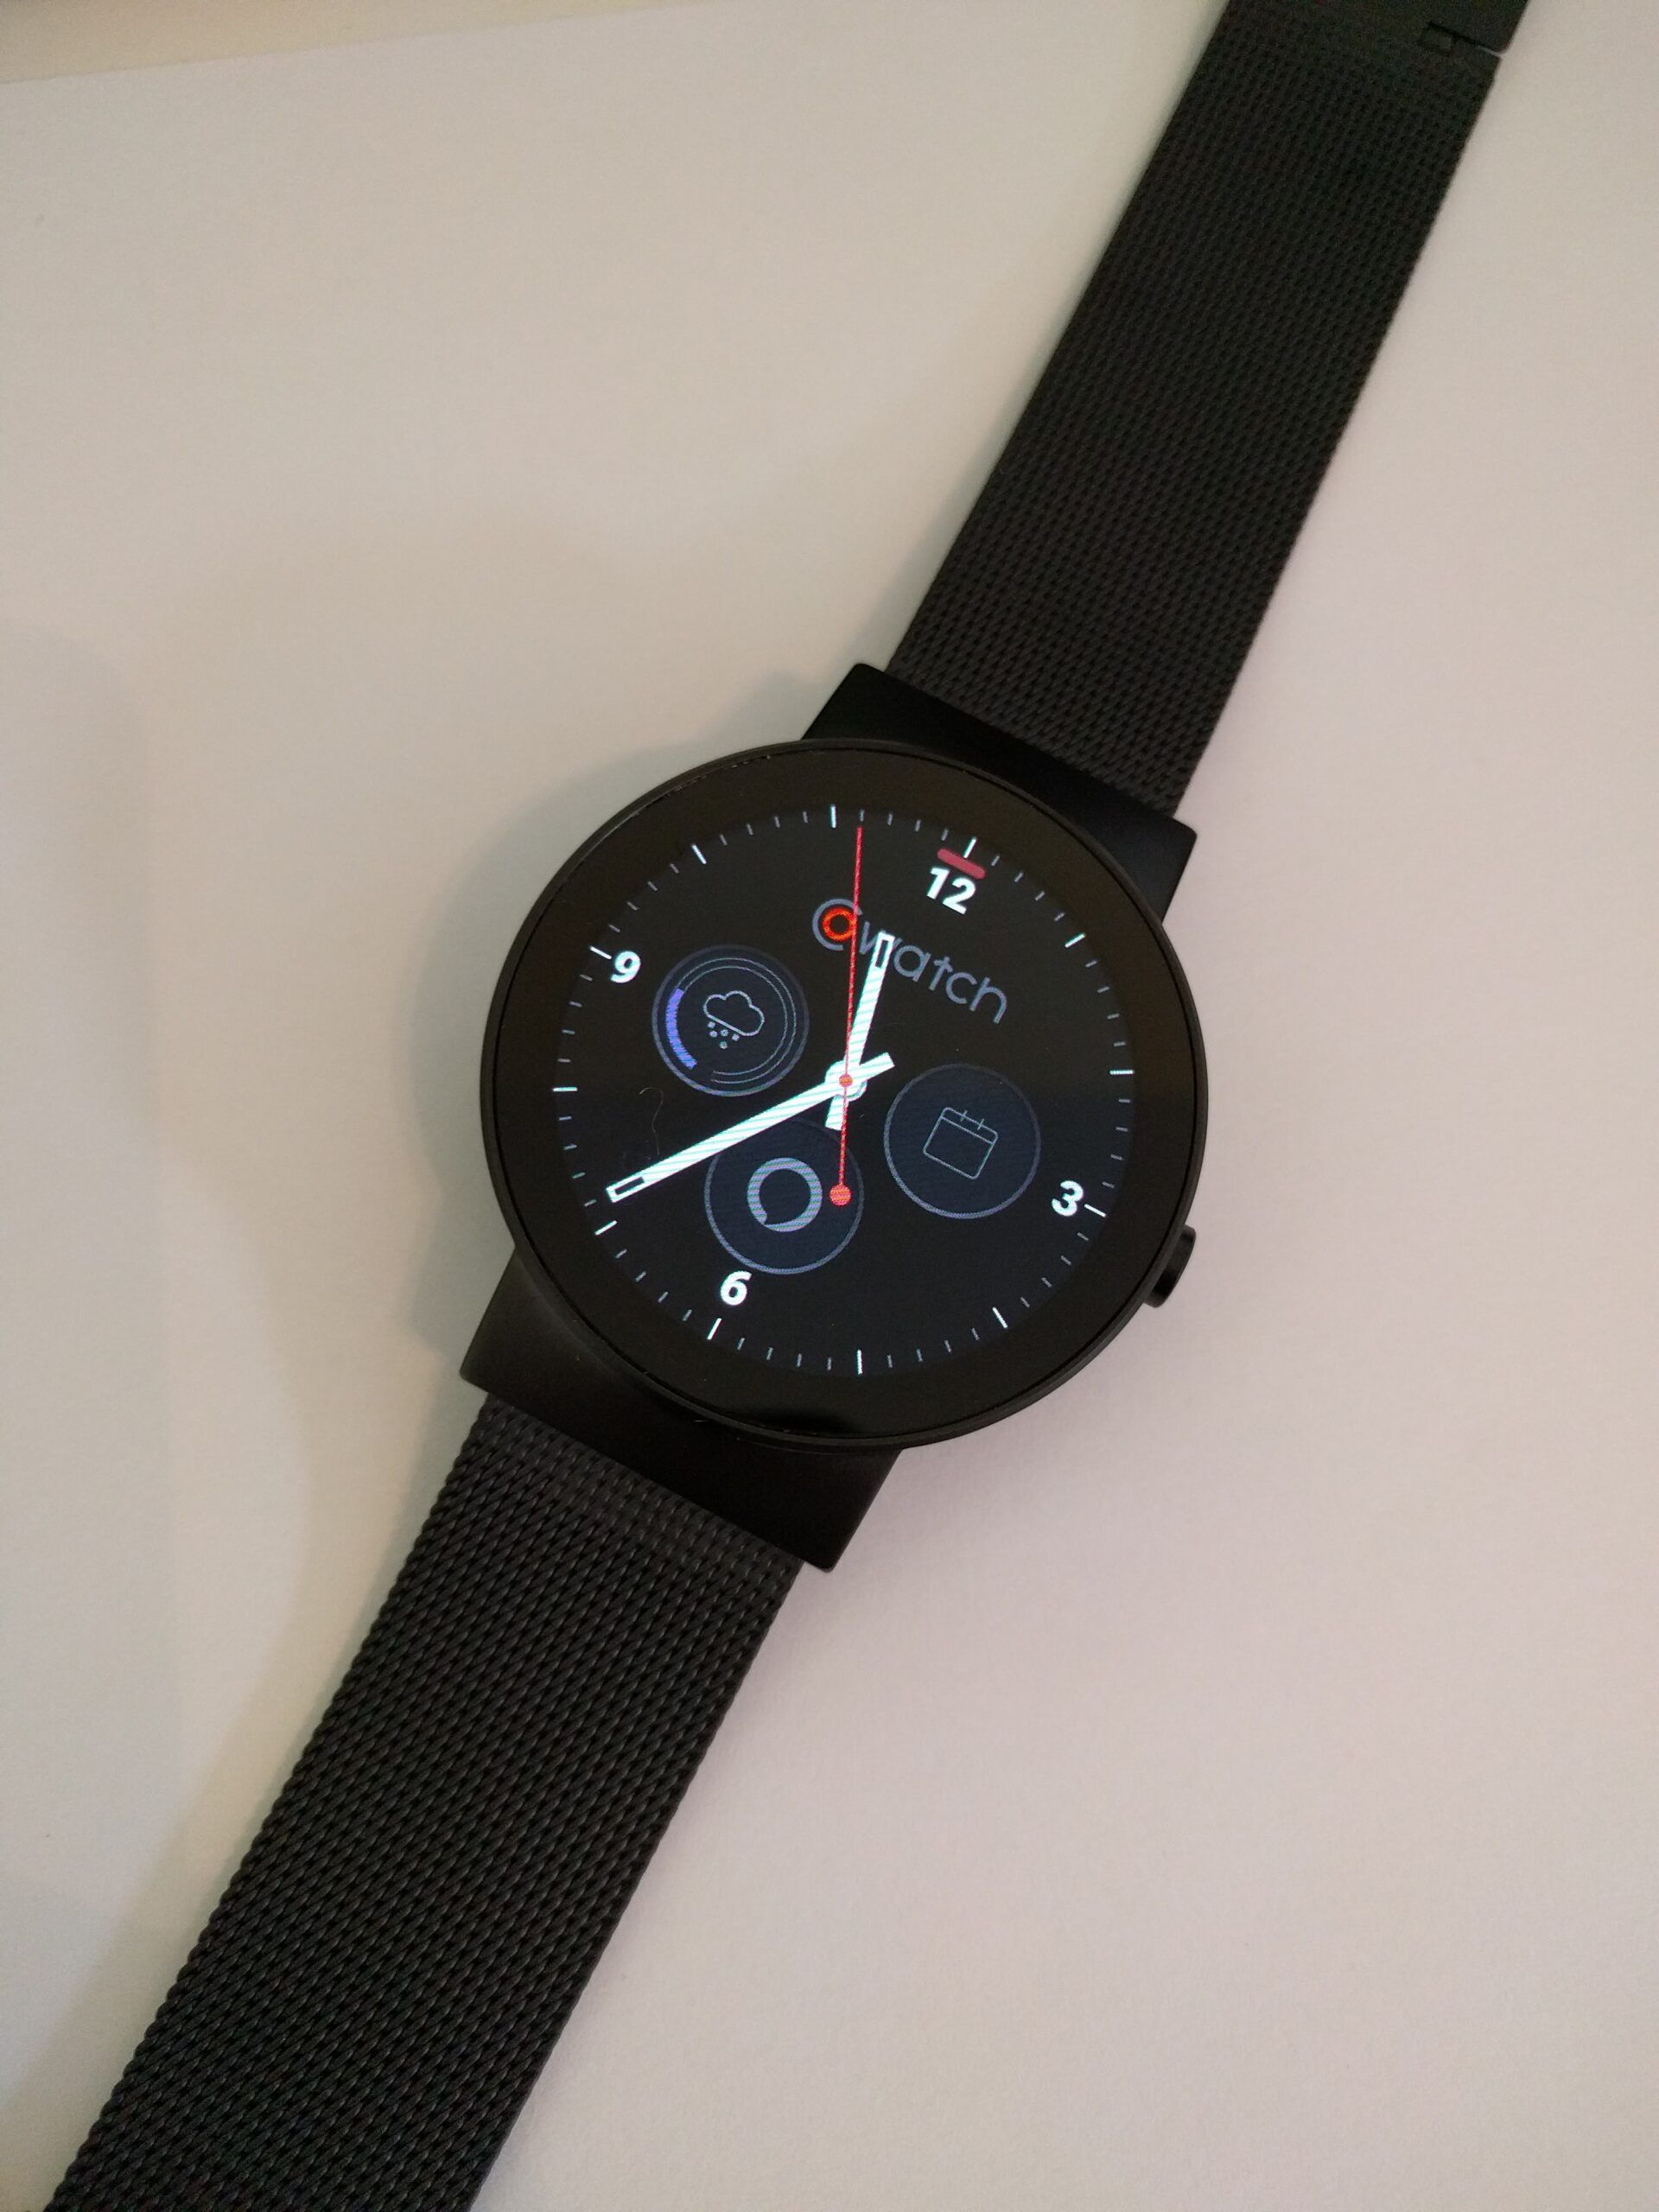 CoWatch Review - Not a Very Smart Watch So We're Giving it Away!